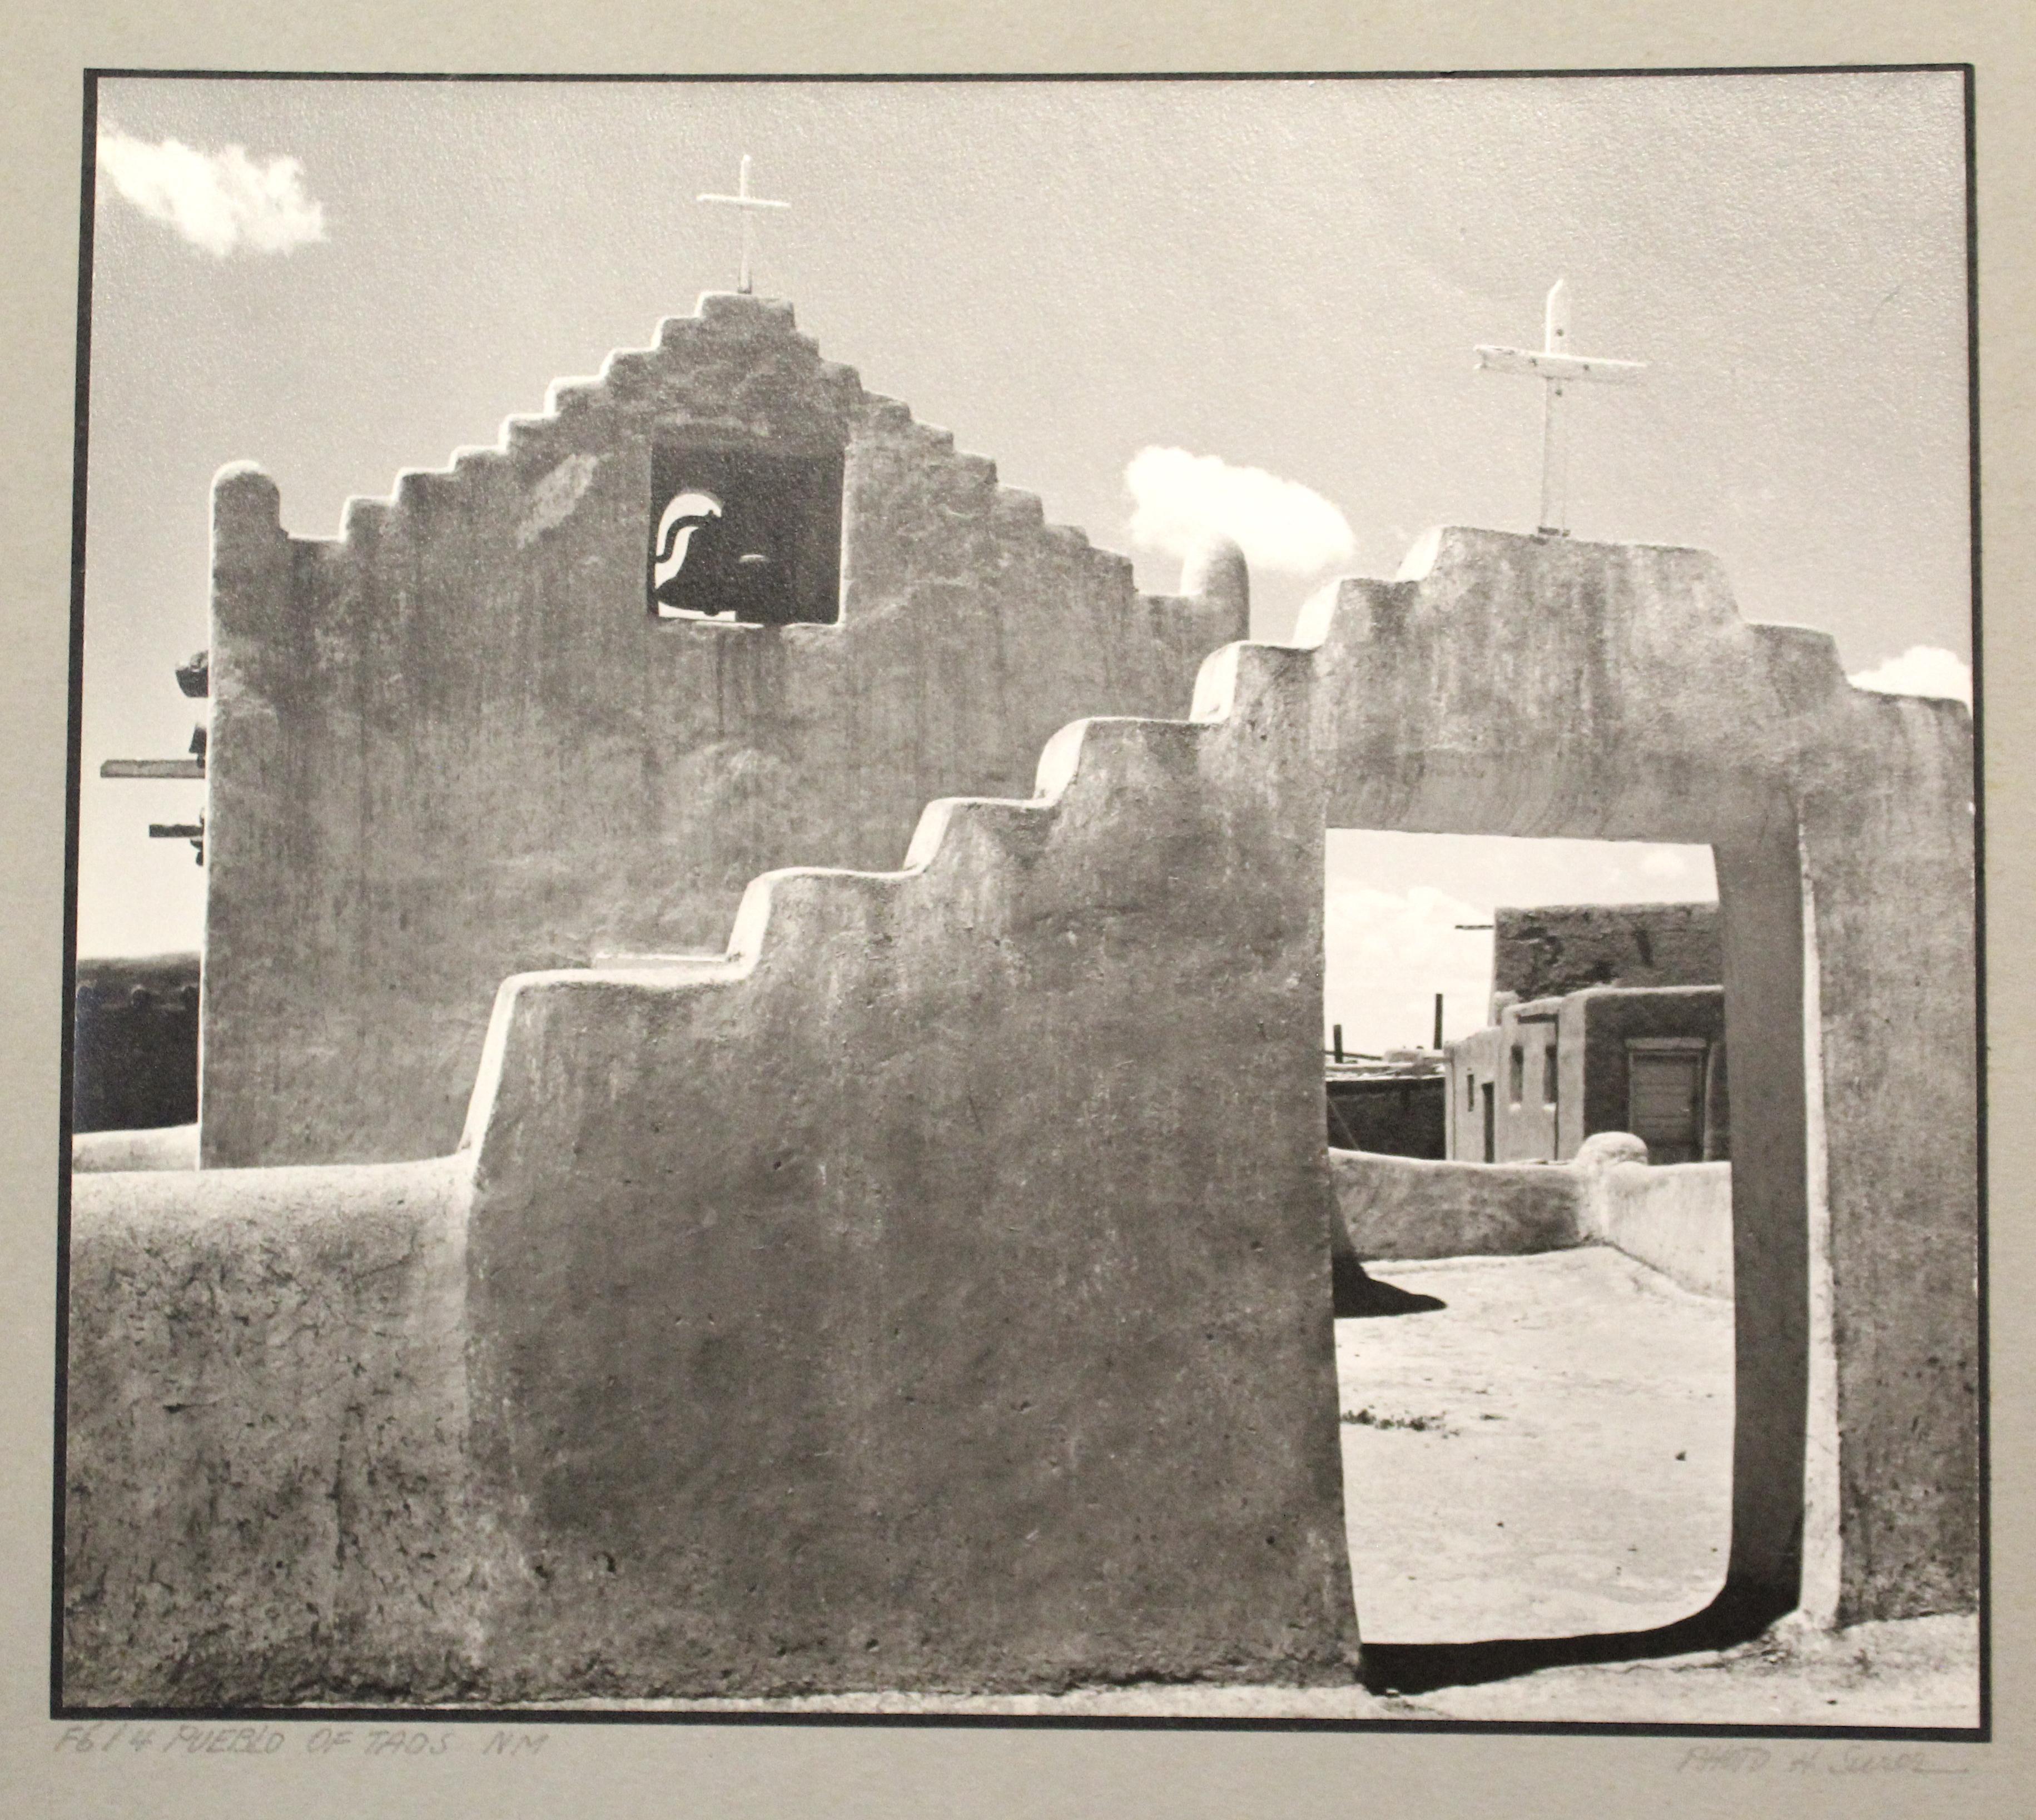 H. Surer Black and White Photograph - Vintage Black and White Photo, F614 Pueblo of Taos NM